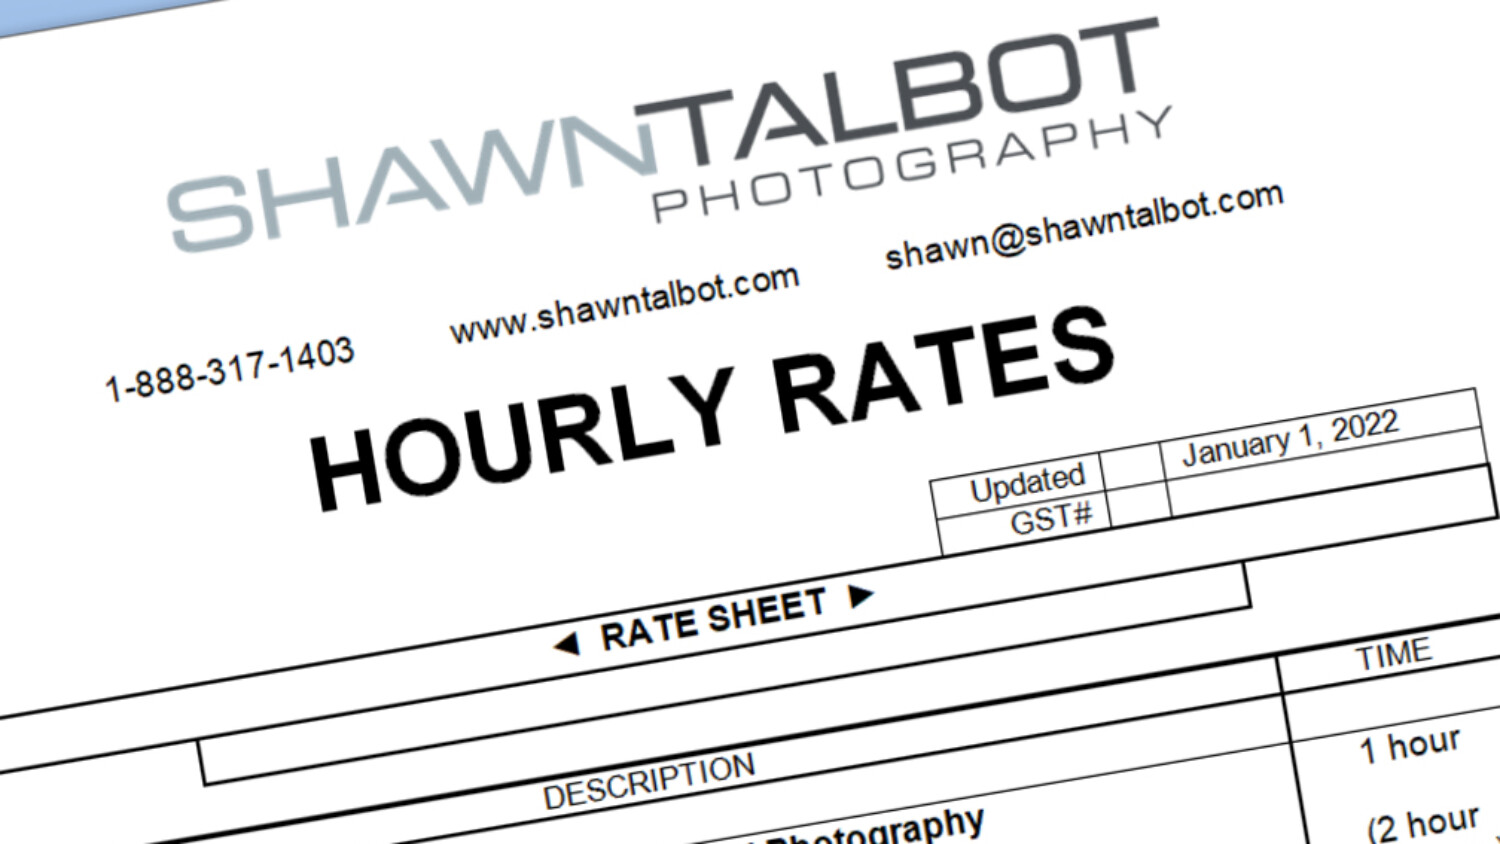 shawn talbot architectural photography hourly rates